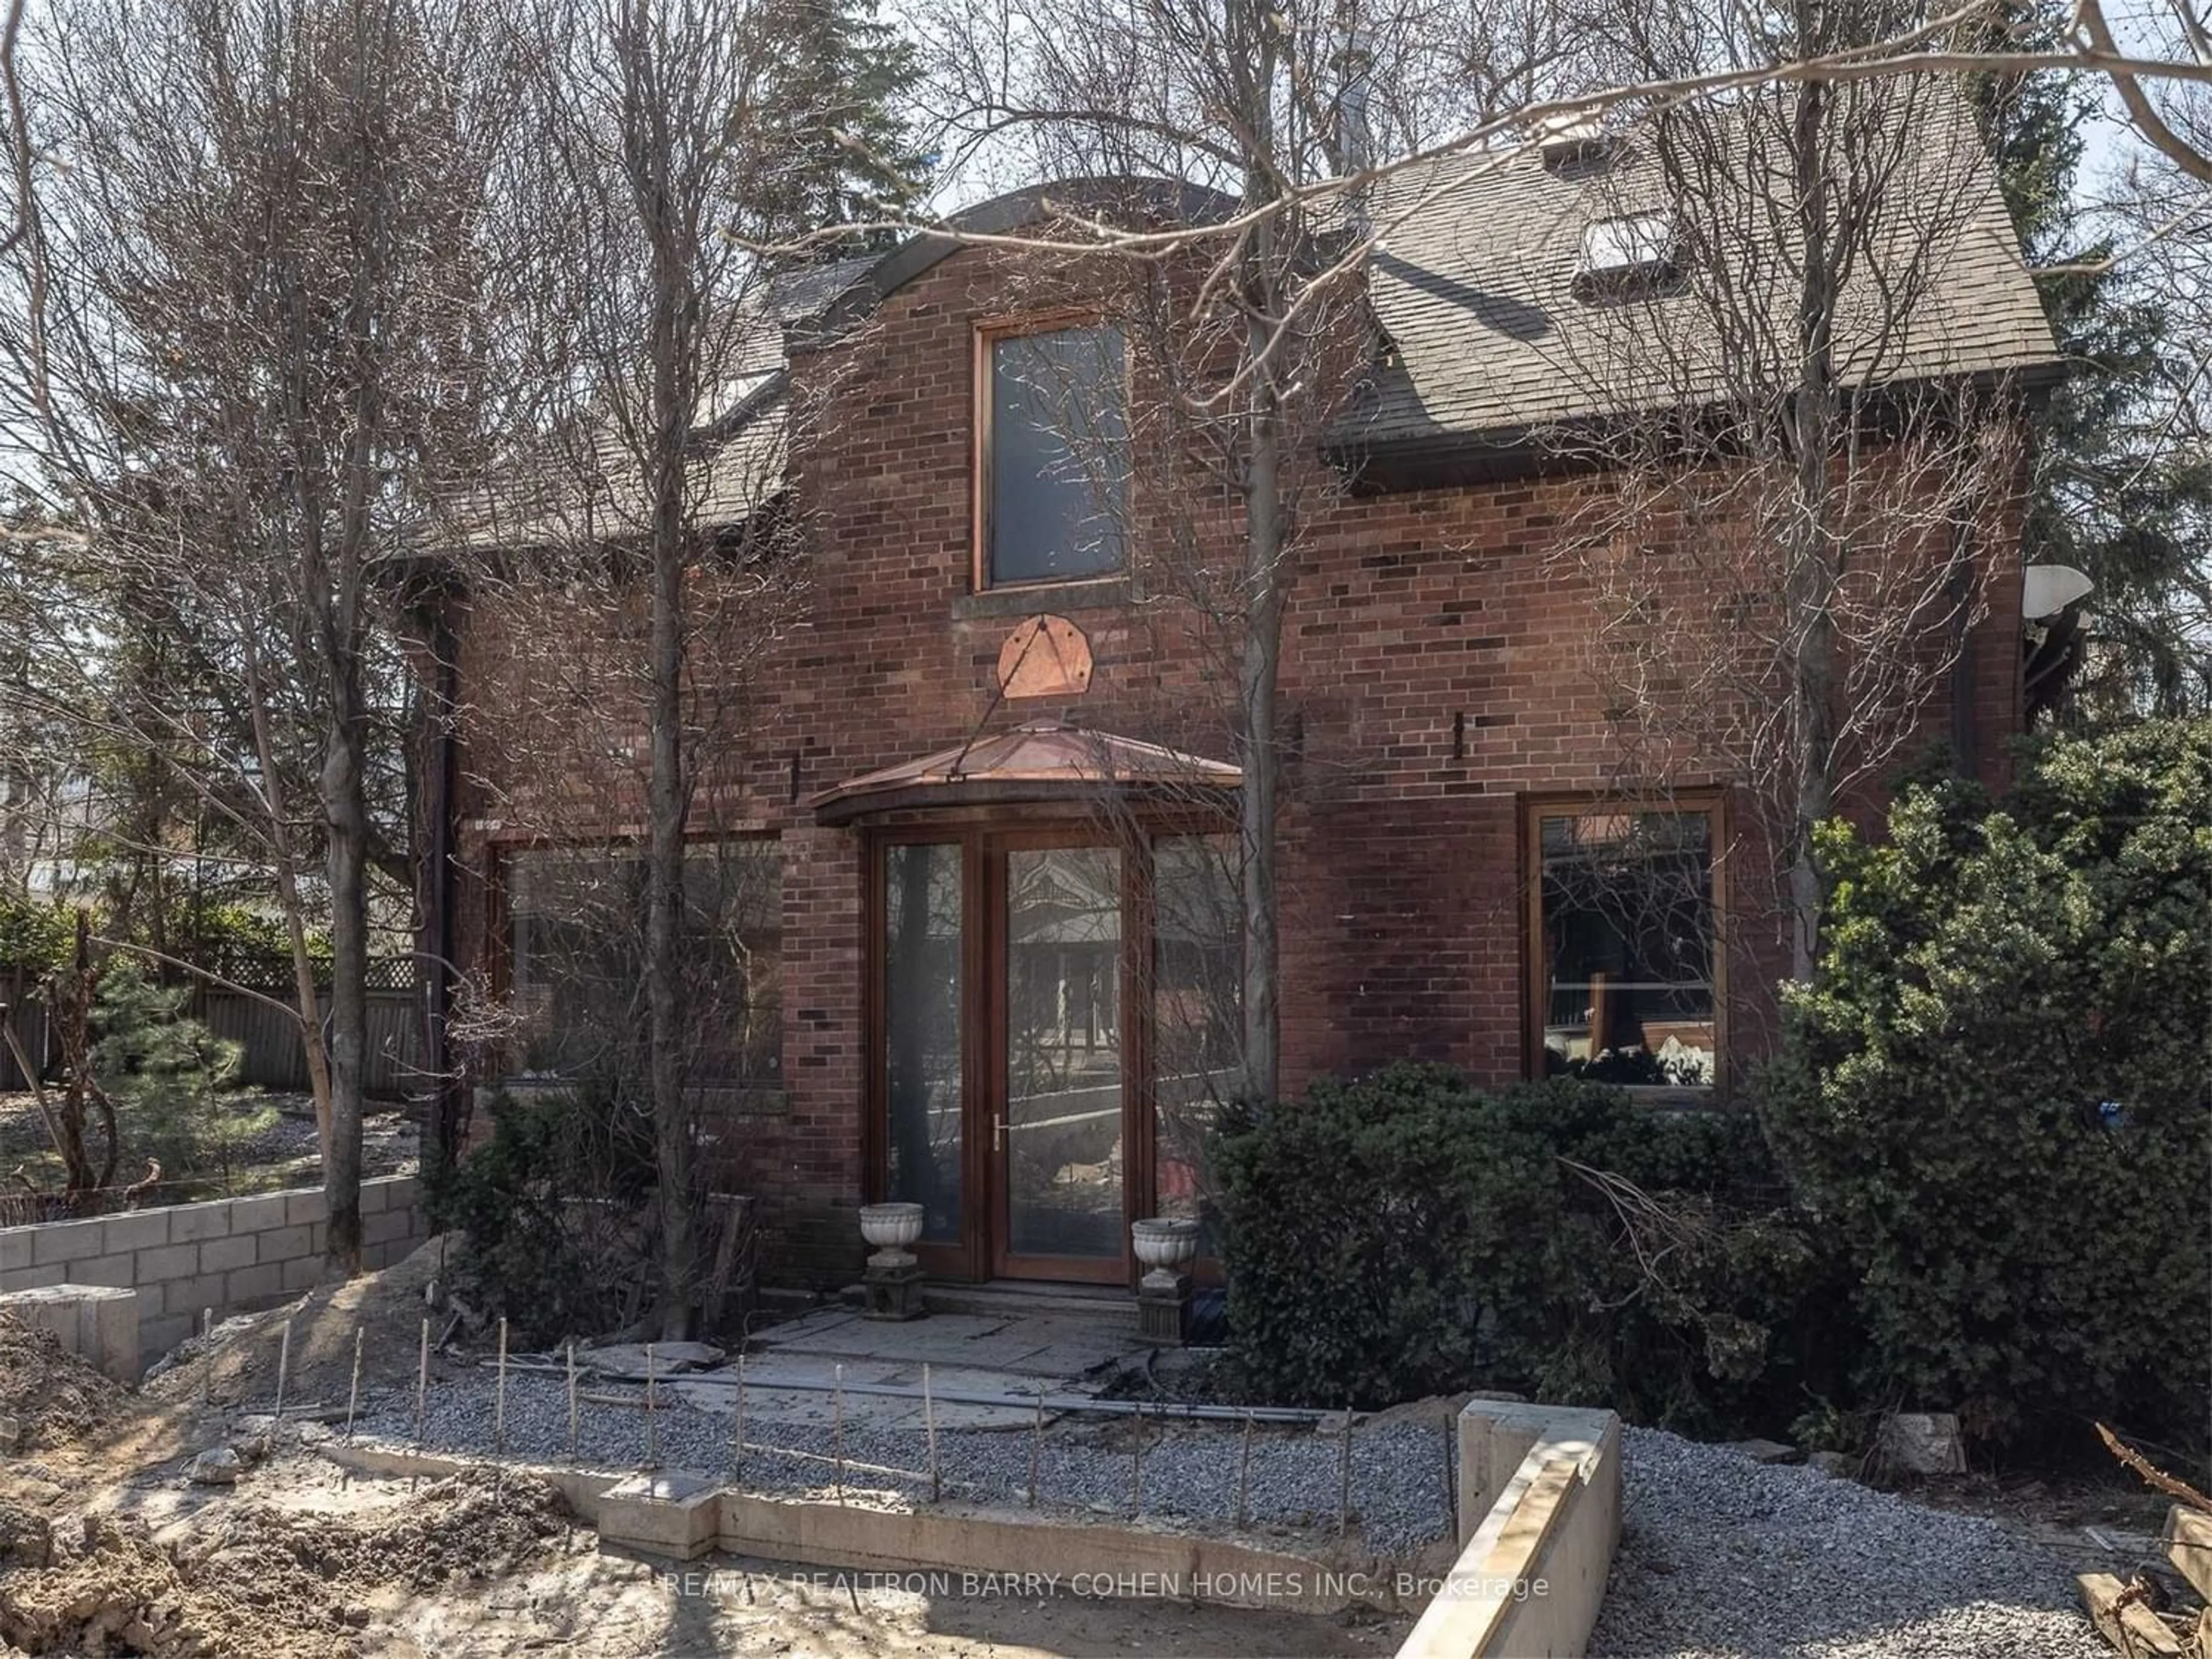 Home with brick exterior material for 135 C Crescent Rd #Coach H, Toronto Ontario M4W 1T8